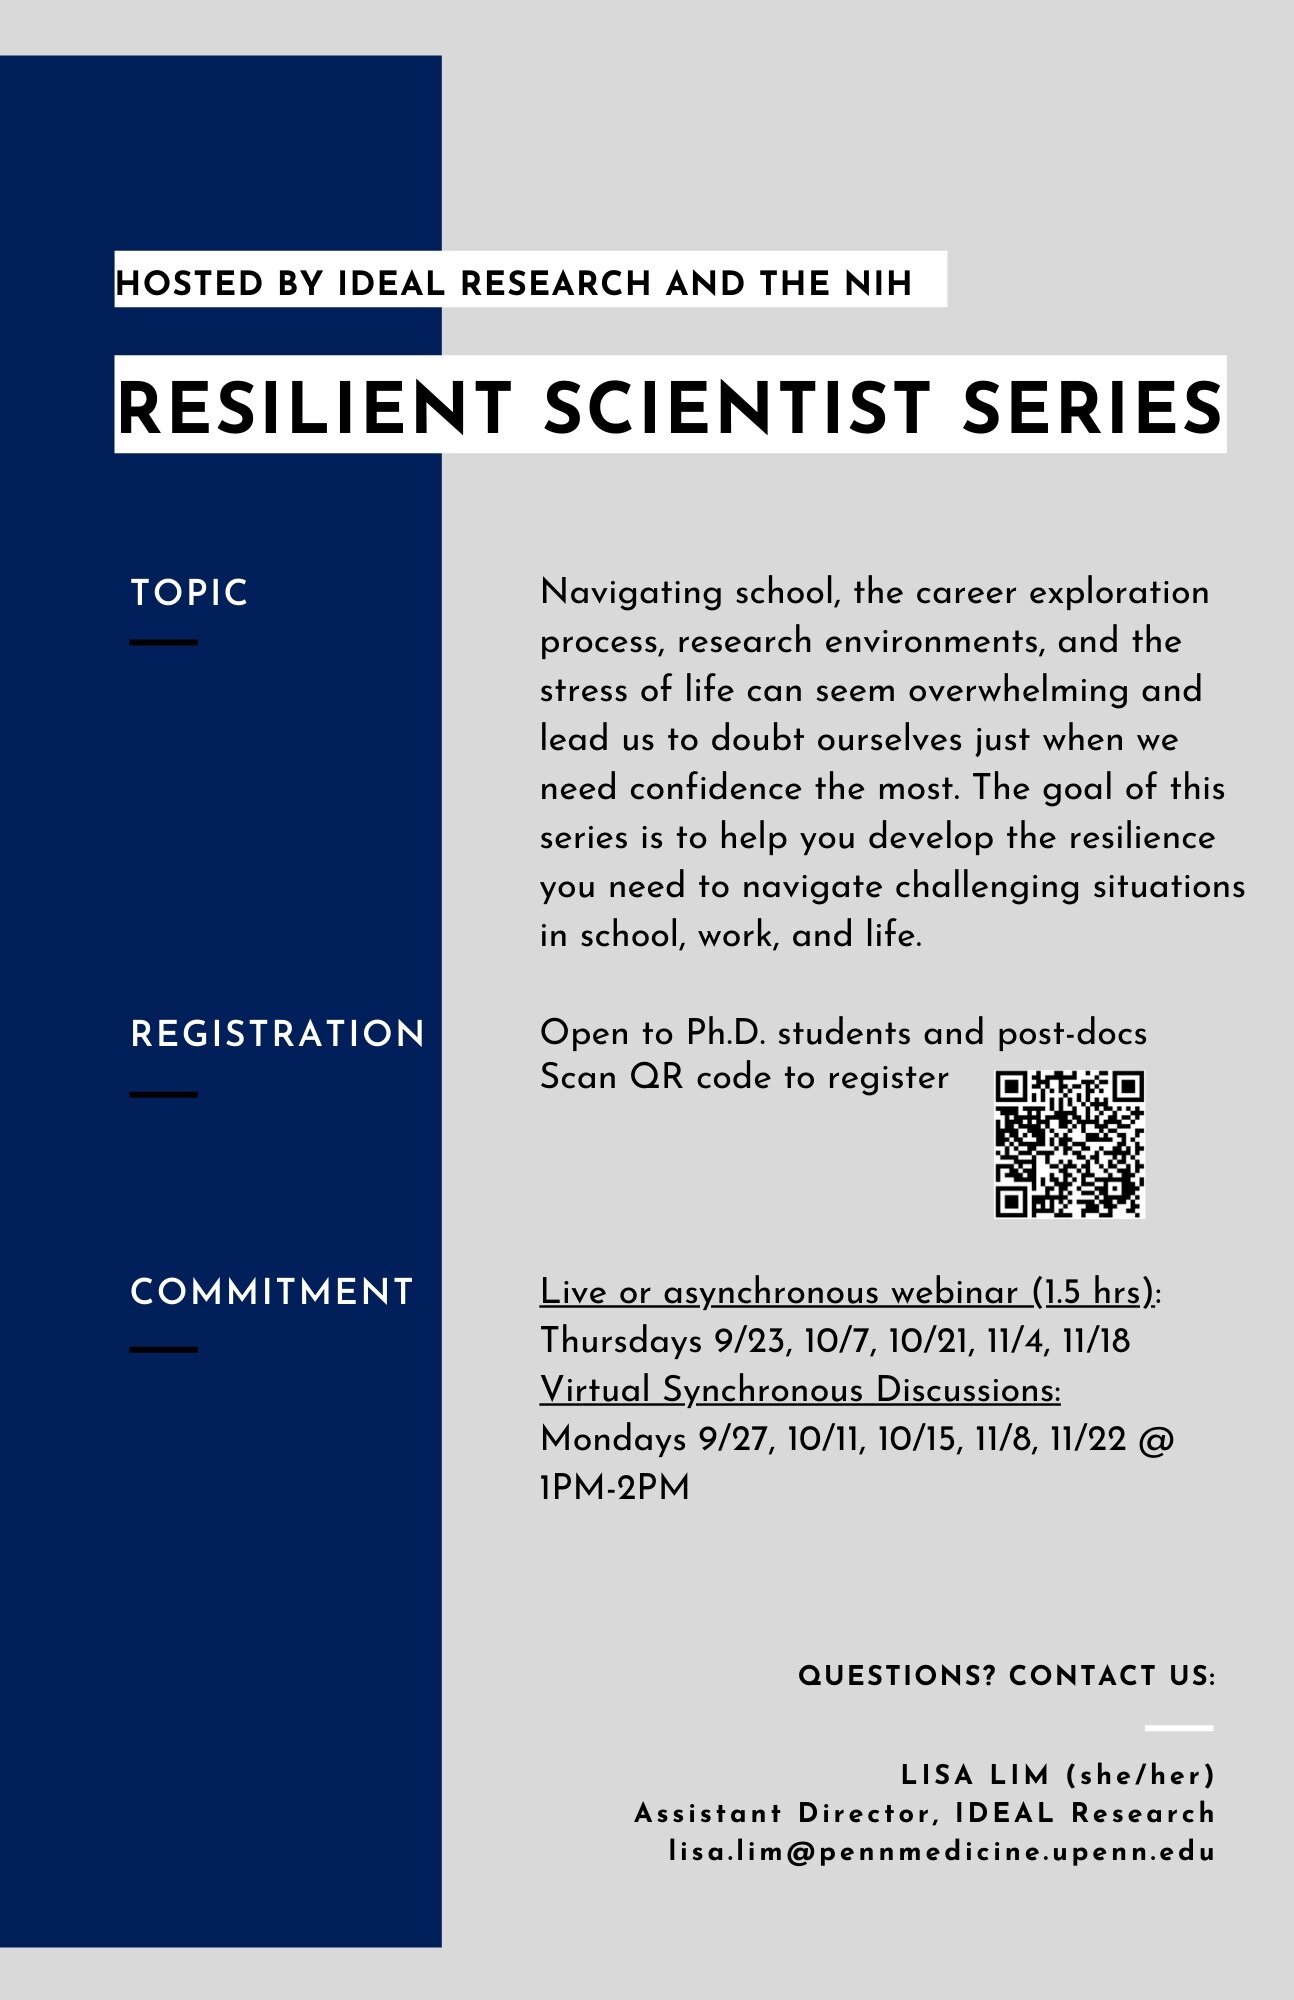 Resilient Scientist Series_FA21_IDEAL Research[88].jpg